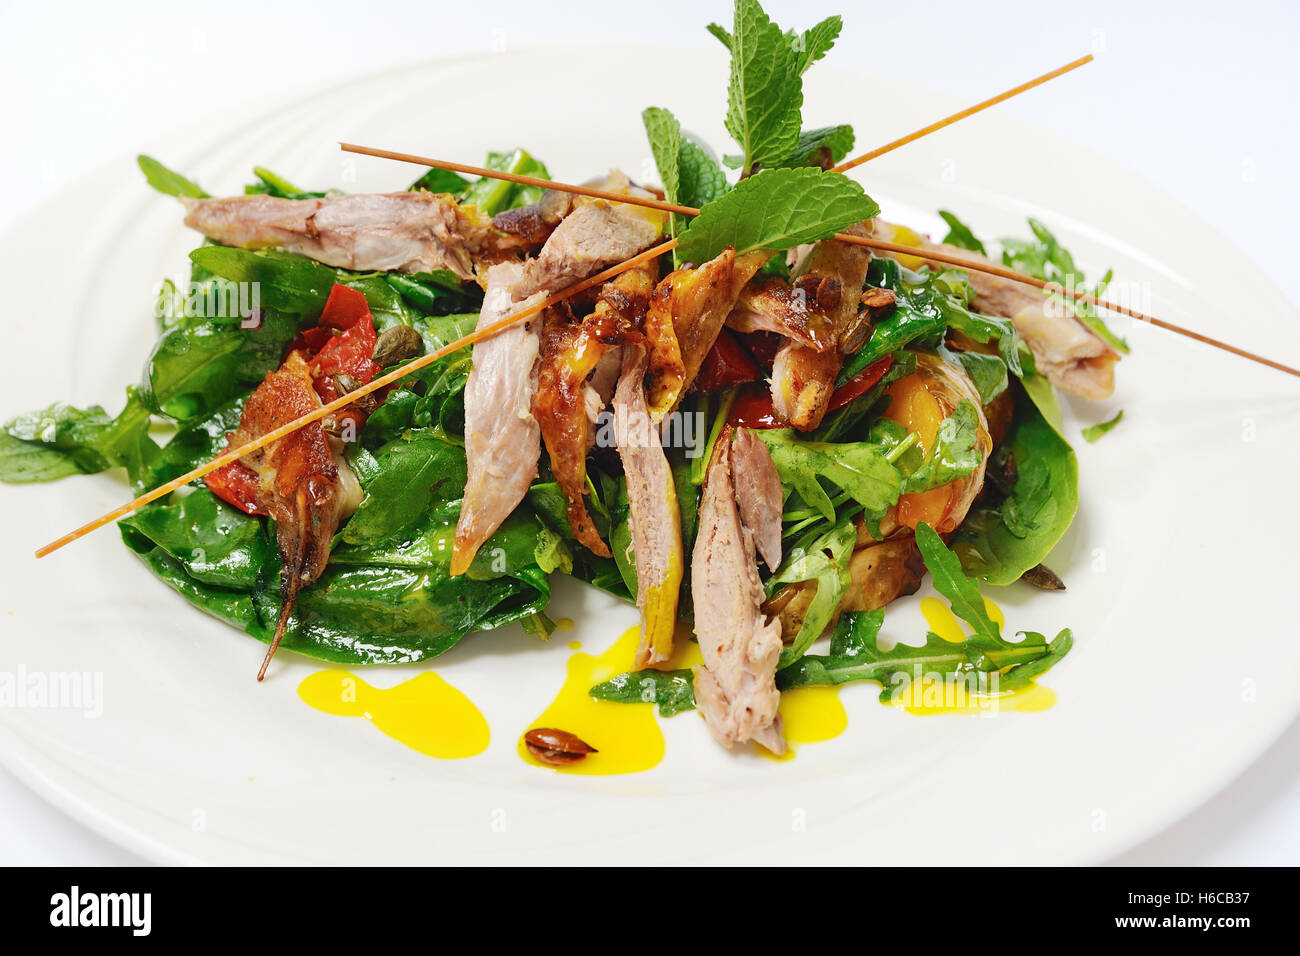 Pumpkin salad with crispy duck and greens Stock Photo